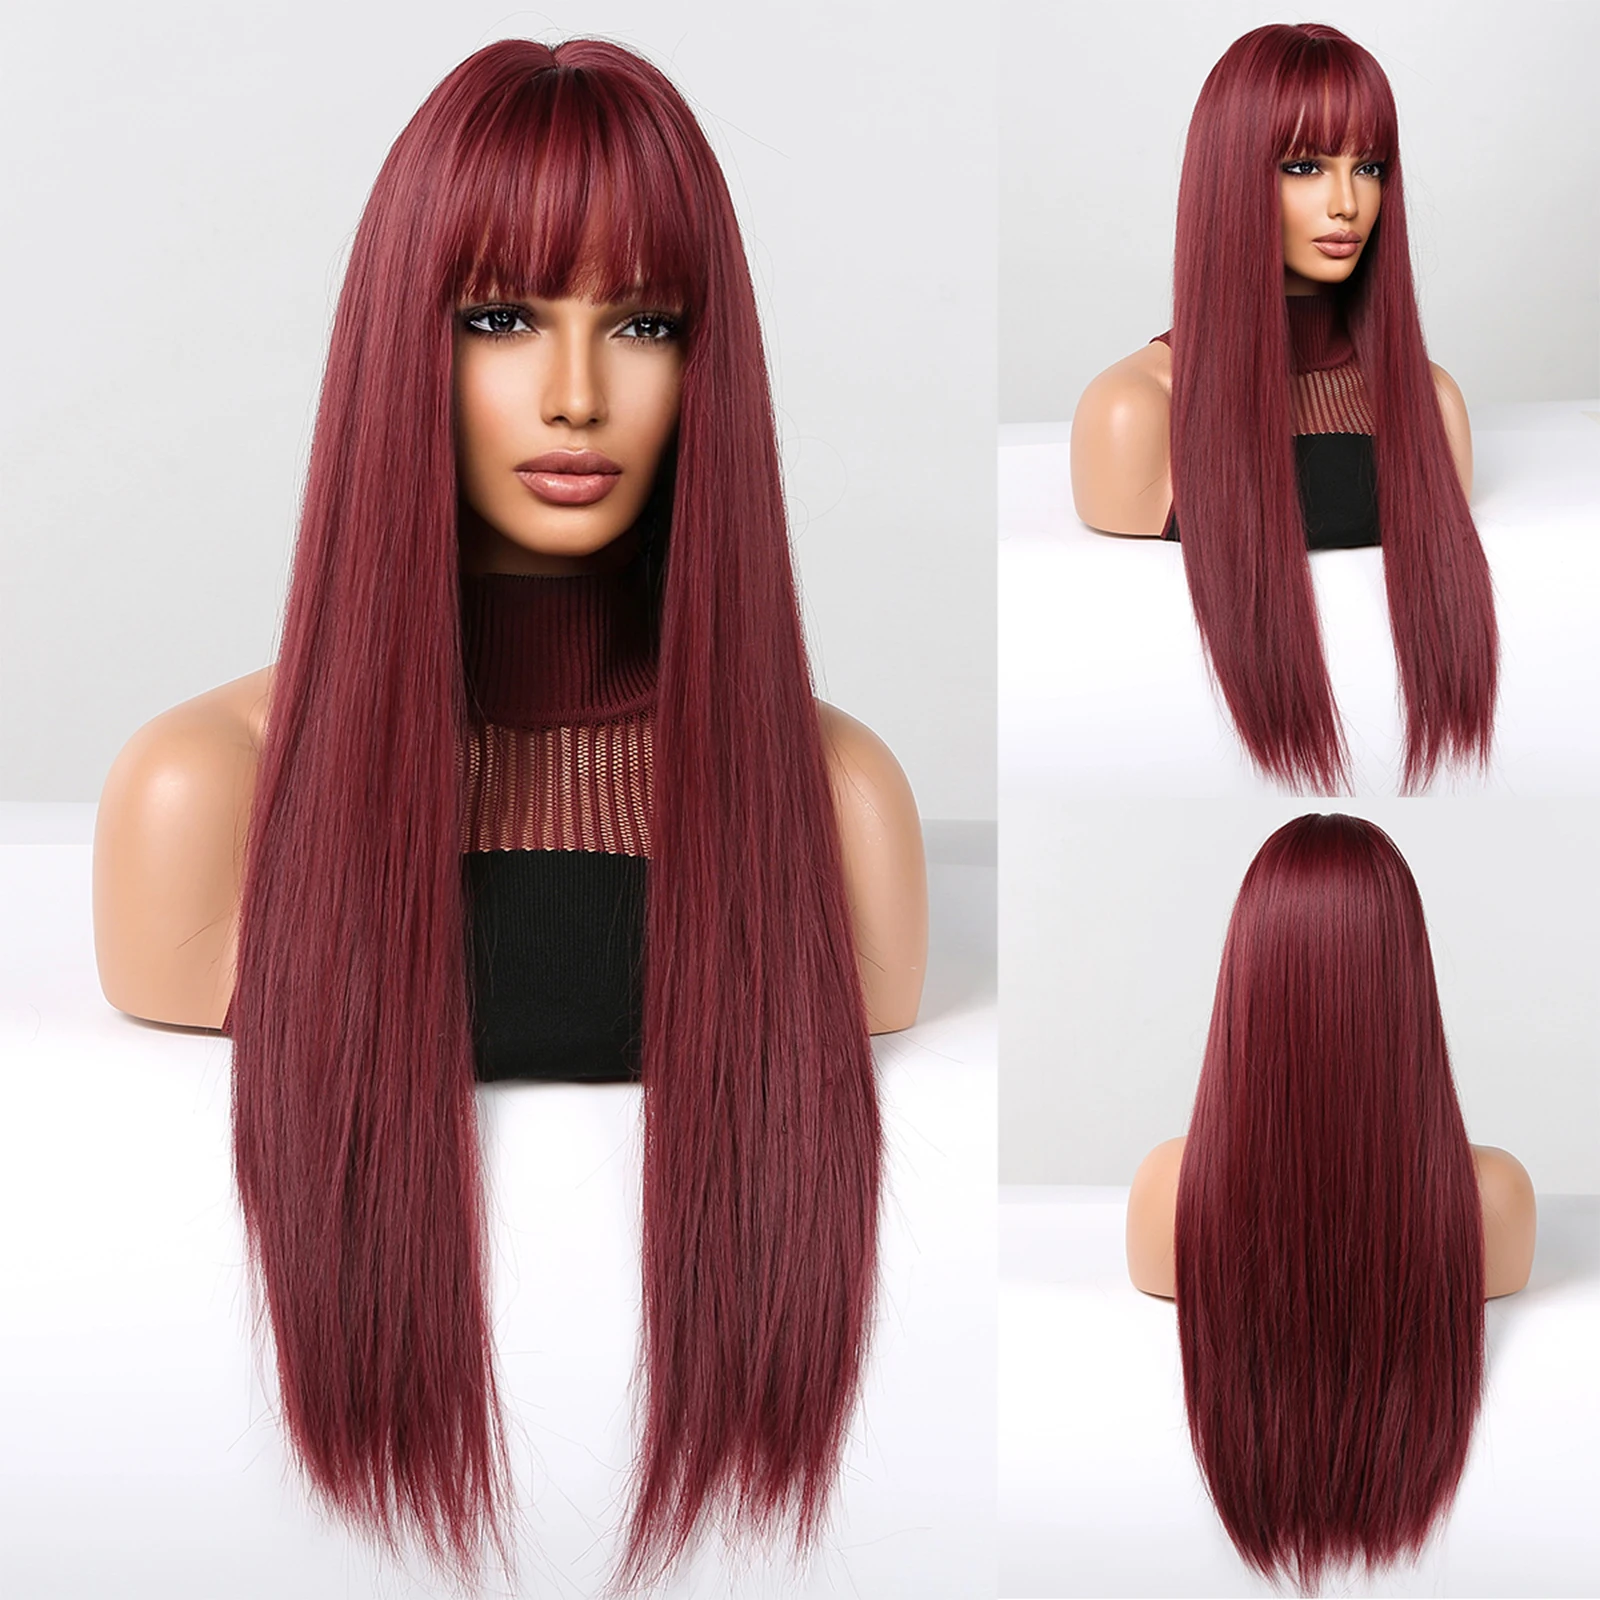 EASIHAIR Burgundy Wine Red Long Cosplay Synthetic Wigs with Bangs for Women Girls Afro Party Lolita Colorful Wig Heat Resistant